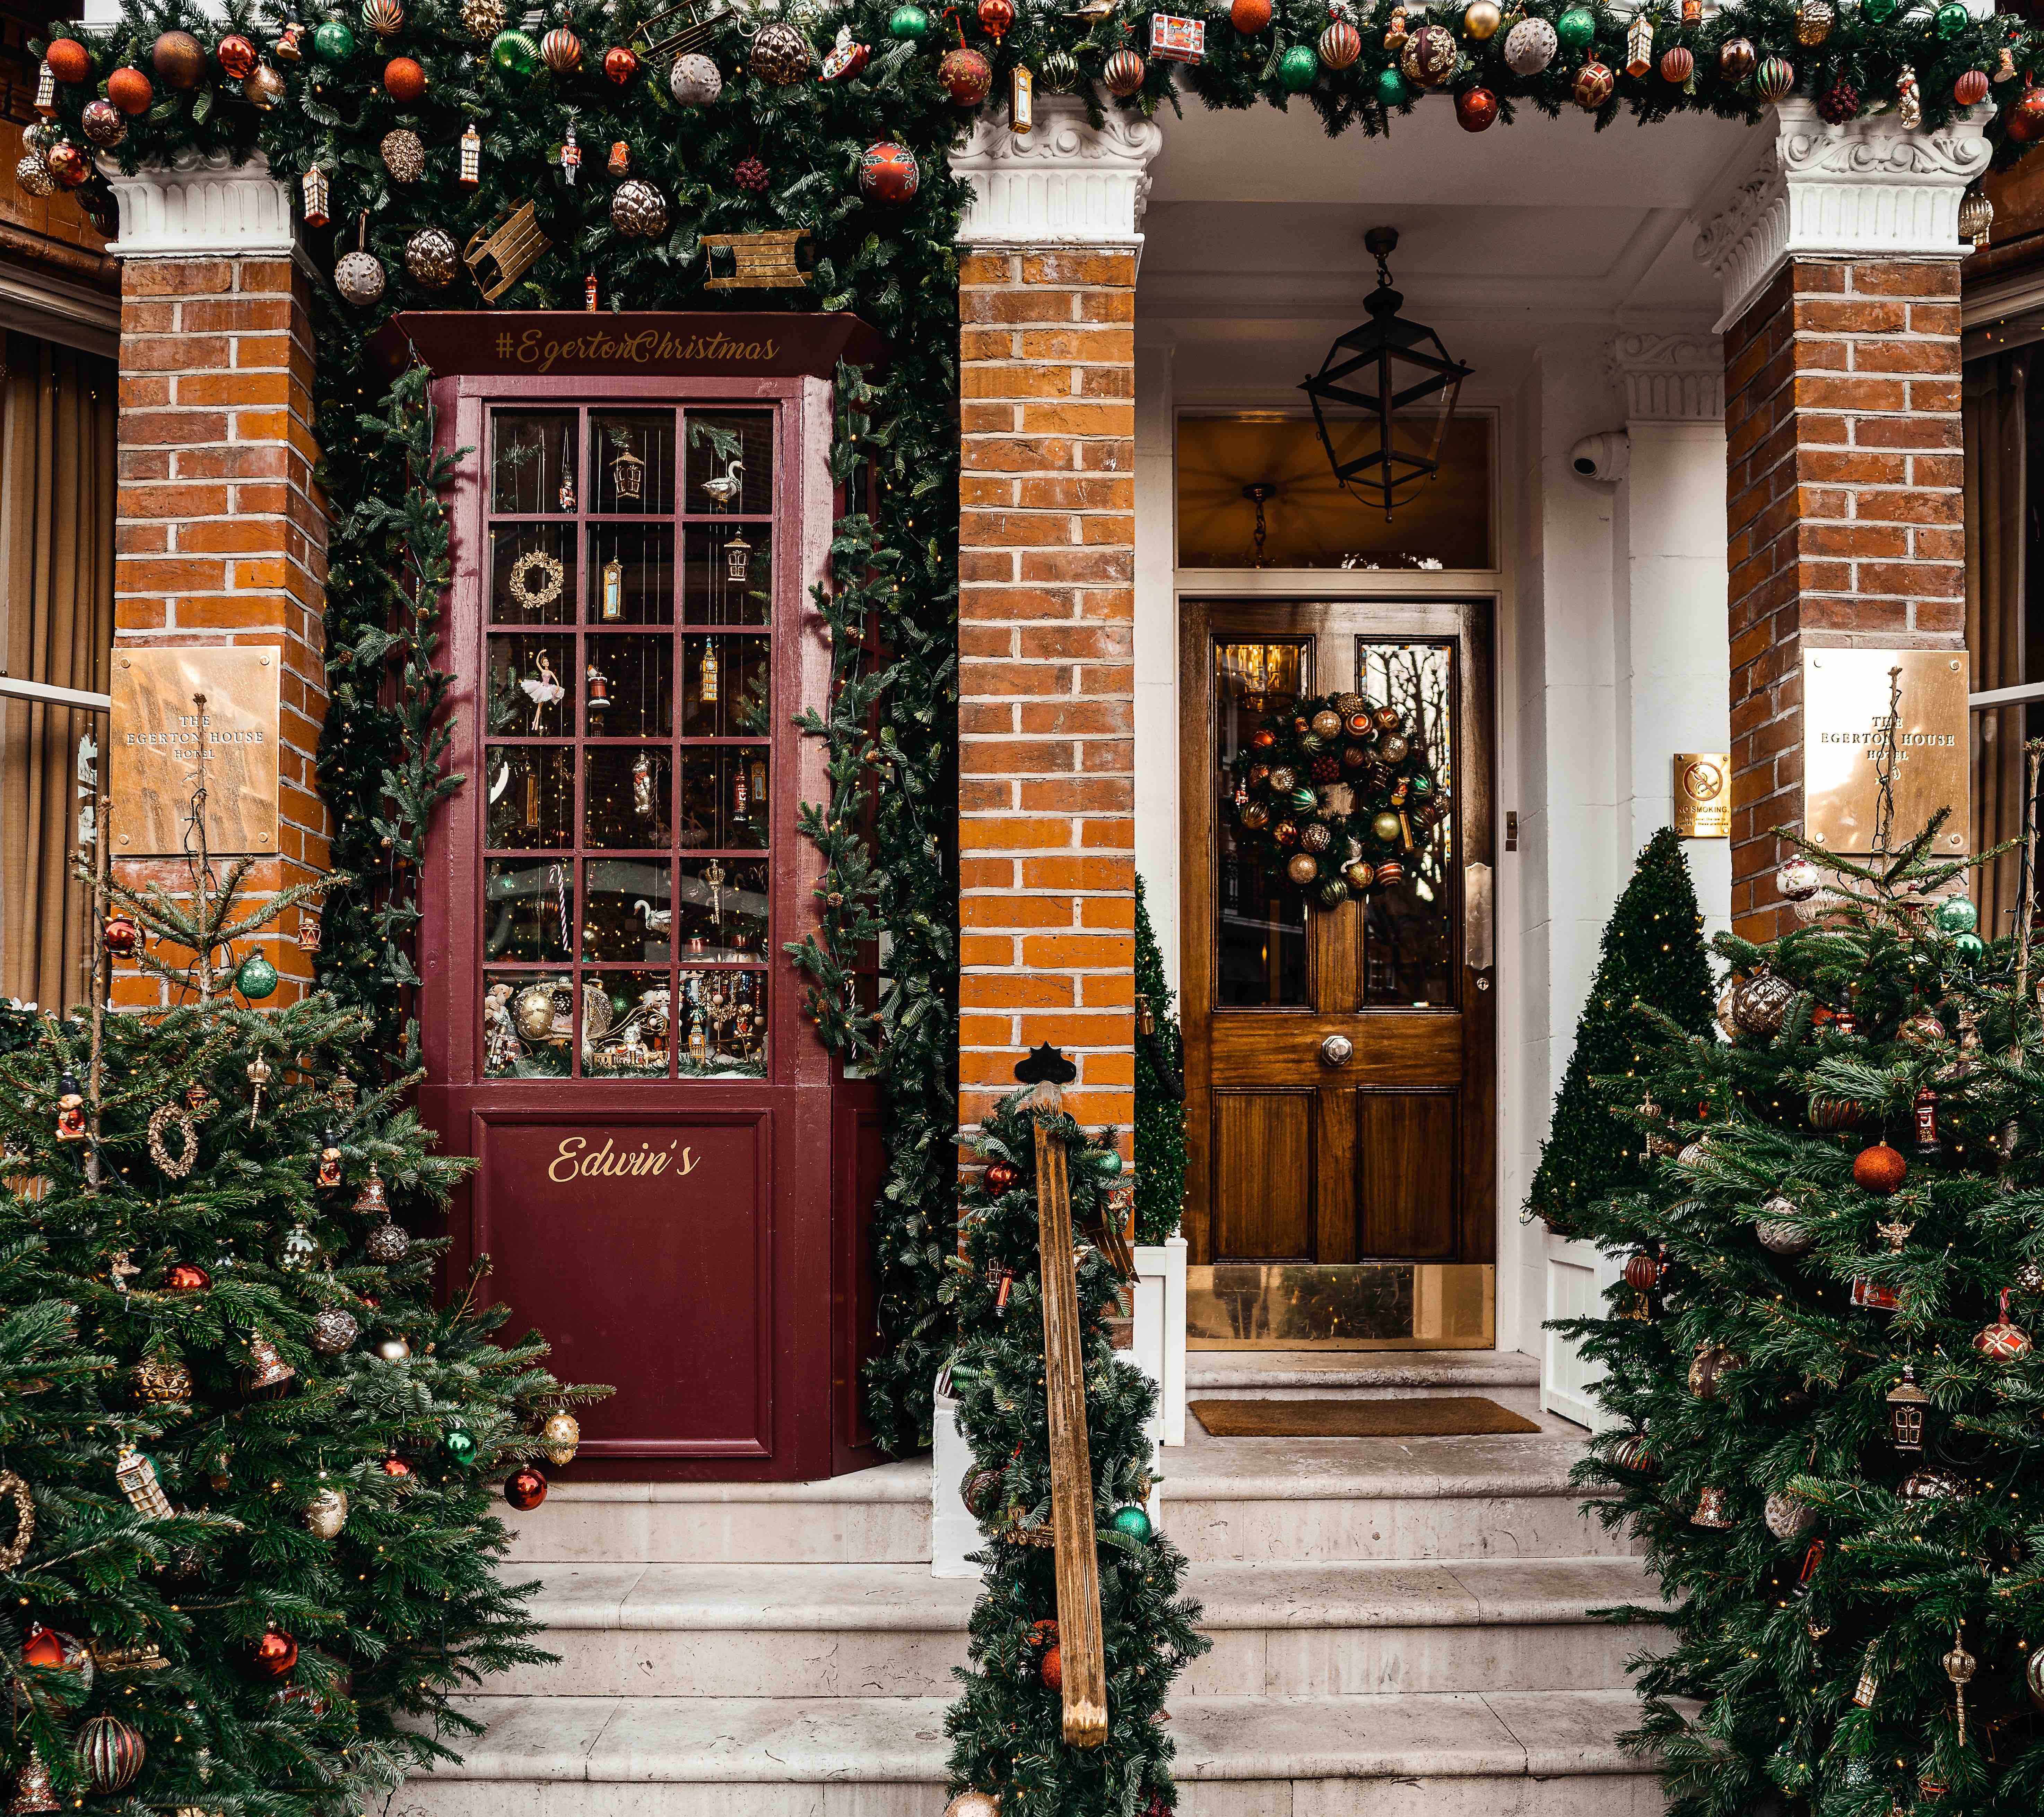 How to Decorate for the Holidays When Your Home is For Sale